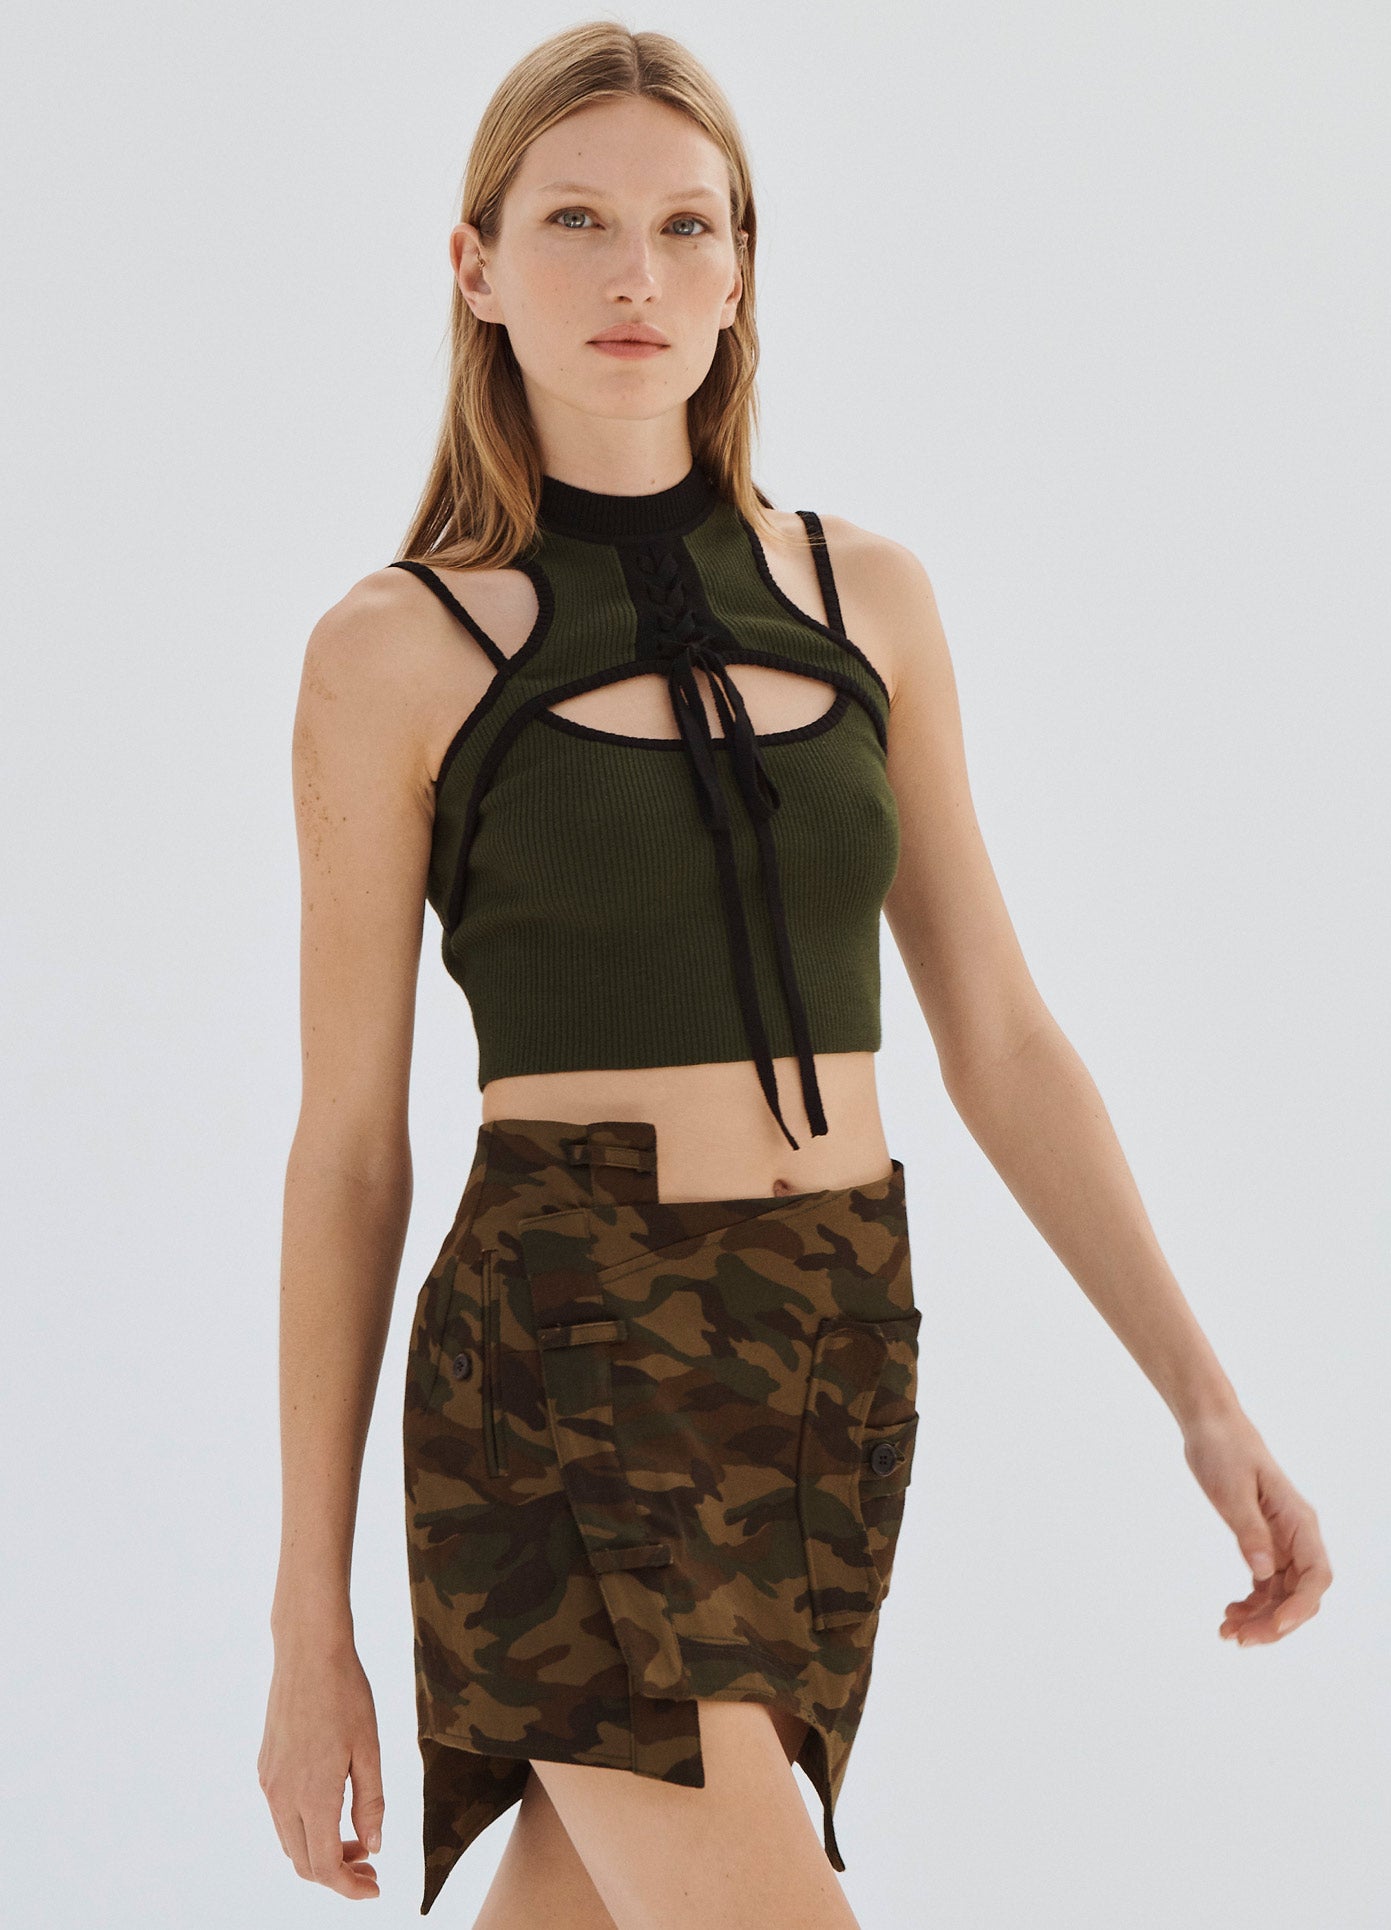 MONSE Deconstructed Trouser Mini Skirt with Pockets in Camo on Model Walking Front View